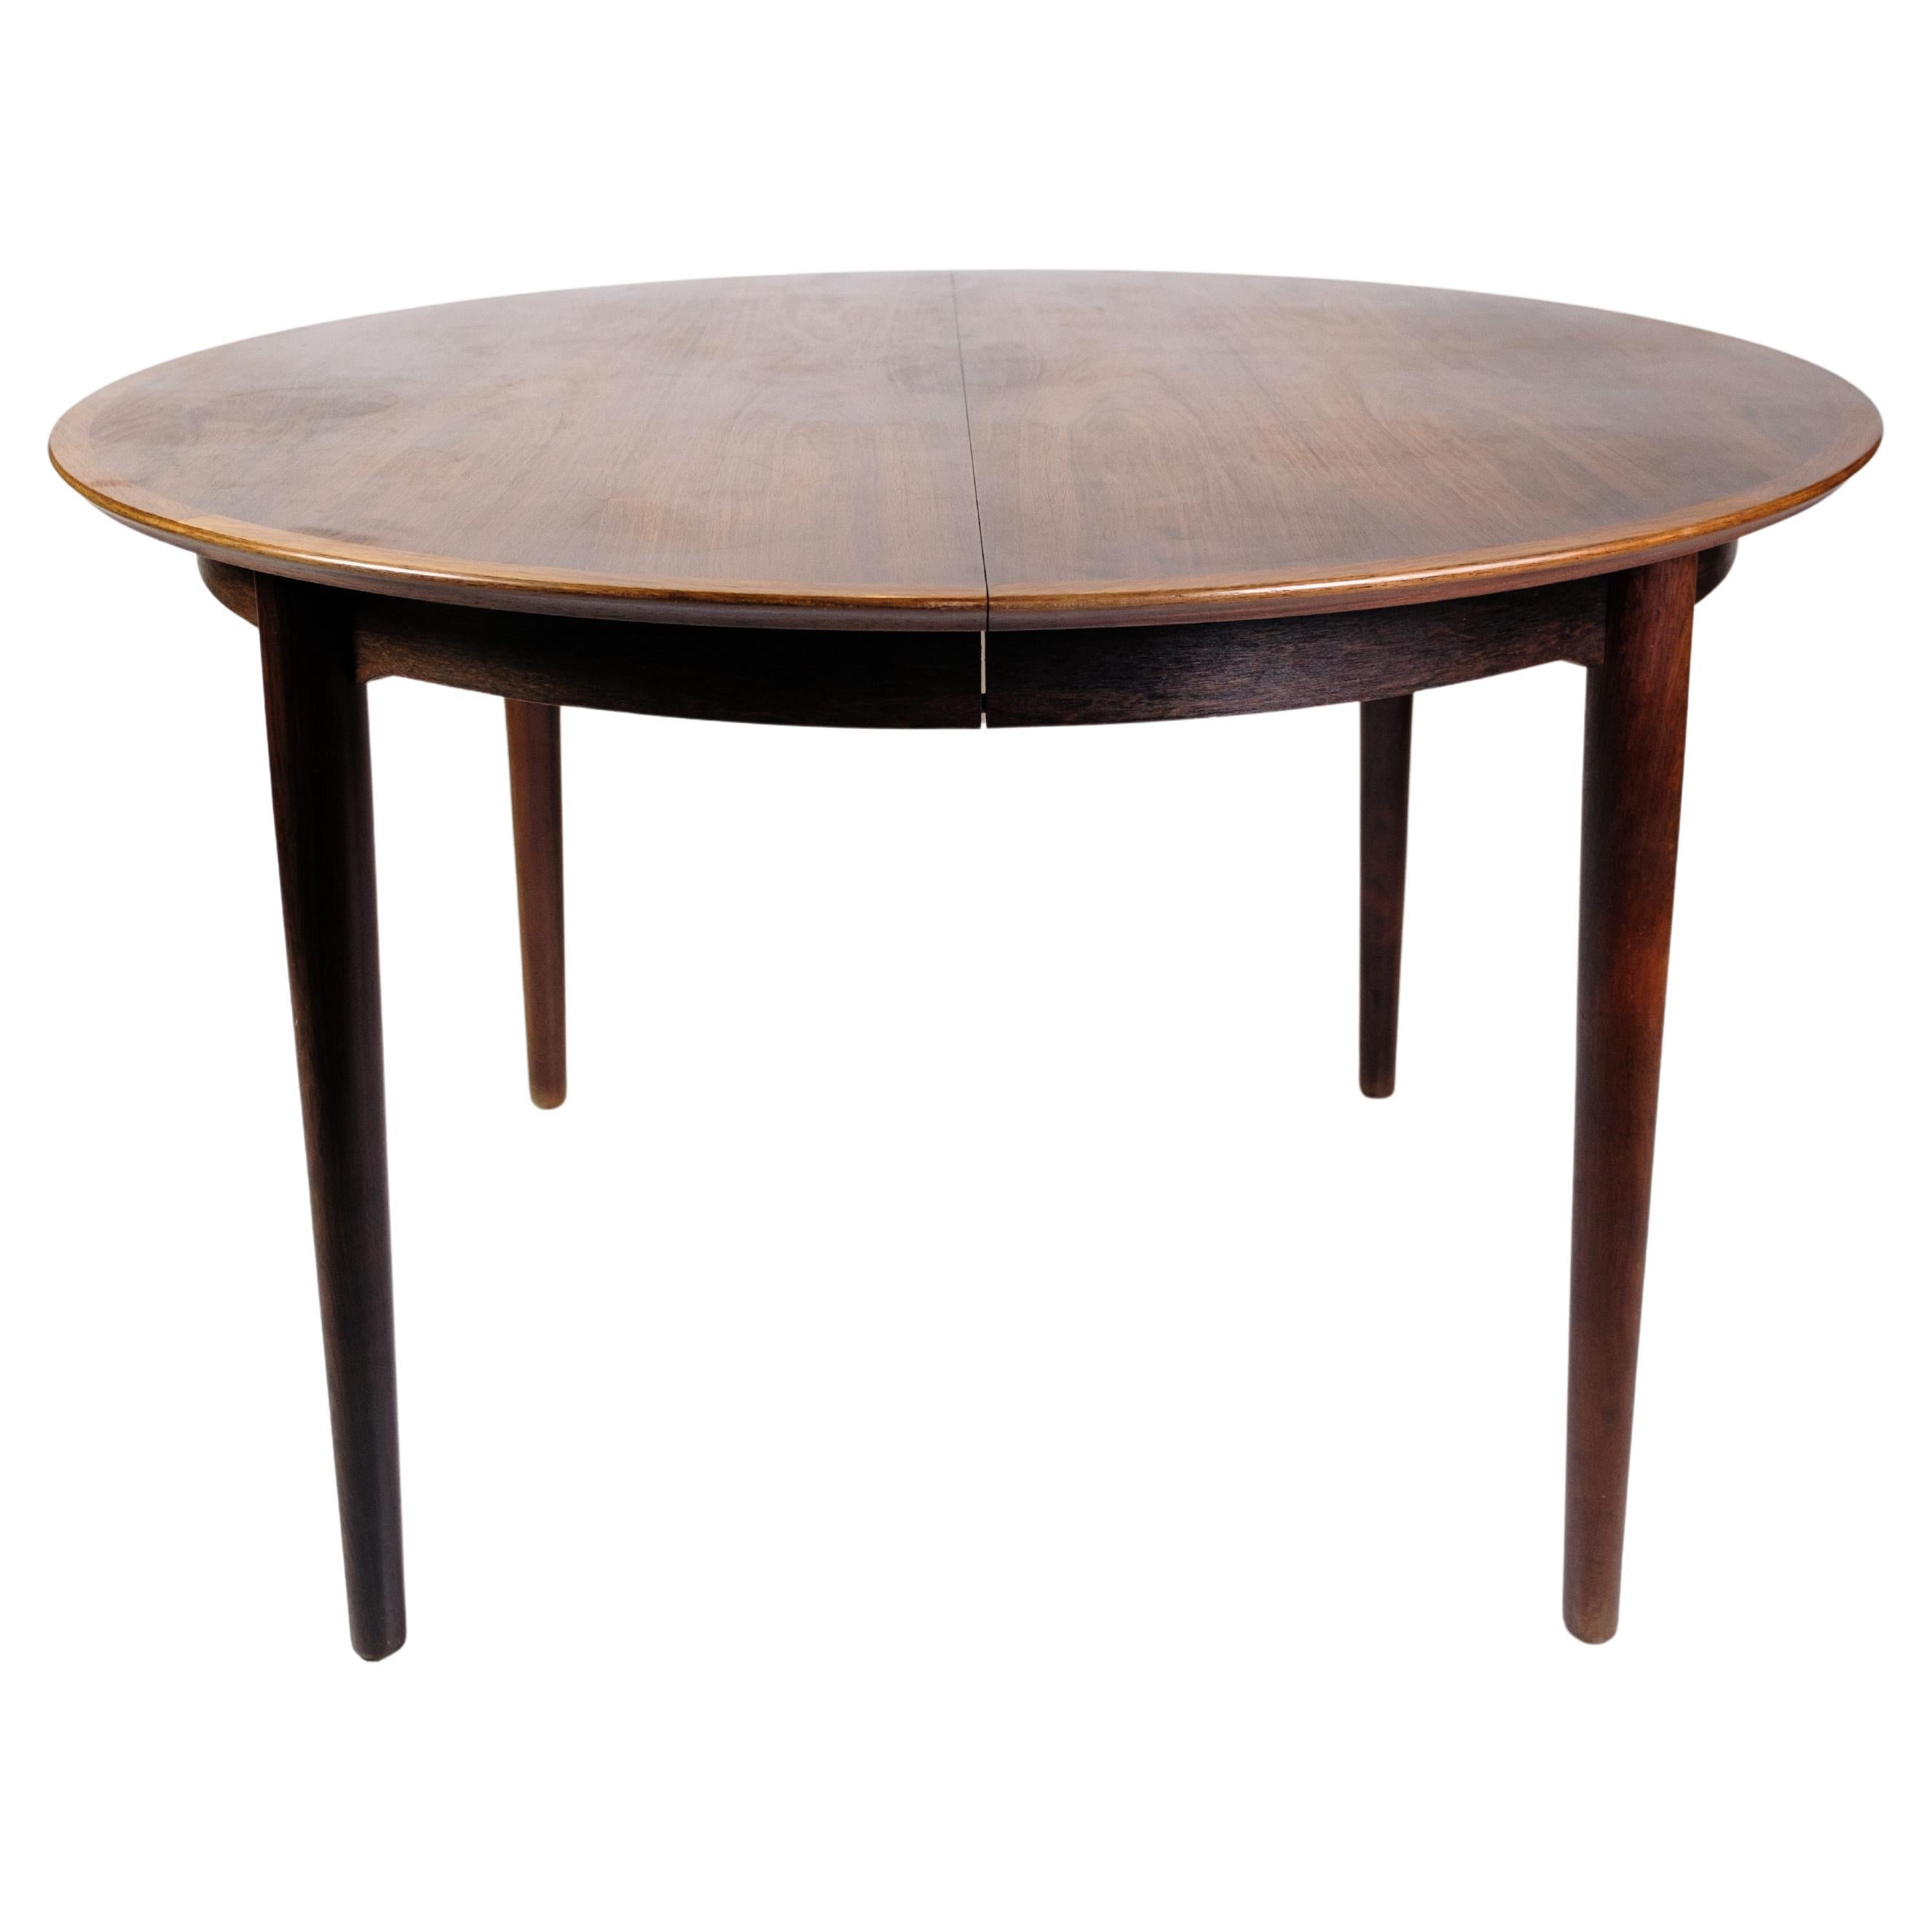 Round Dining Table Made In Rosewood By Arne Vodder From 1960s For Sale